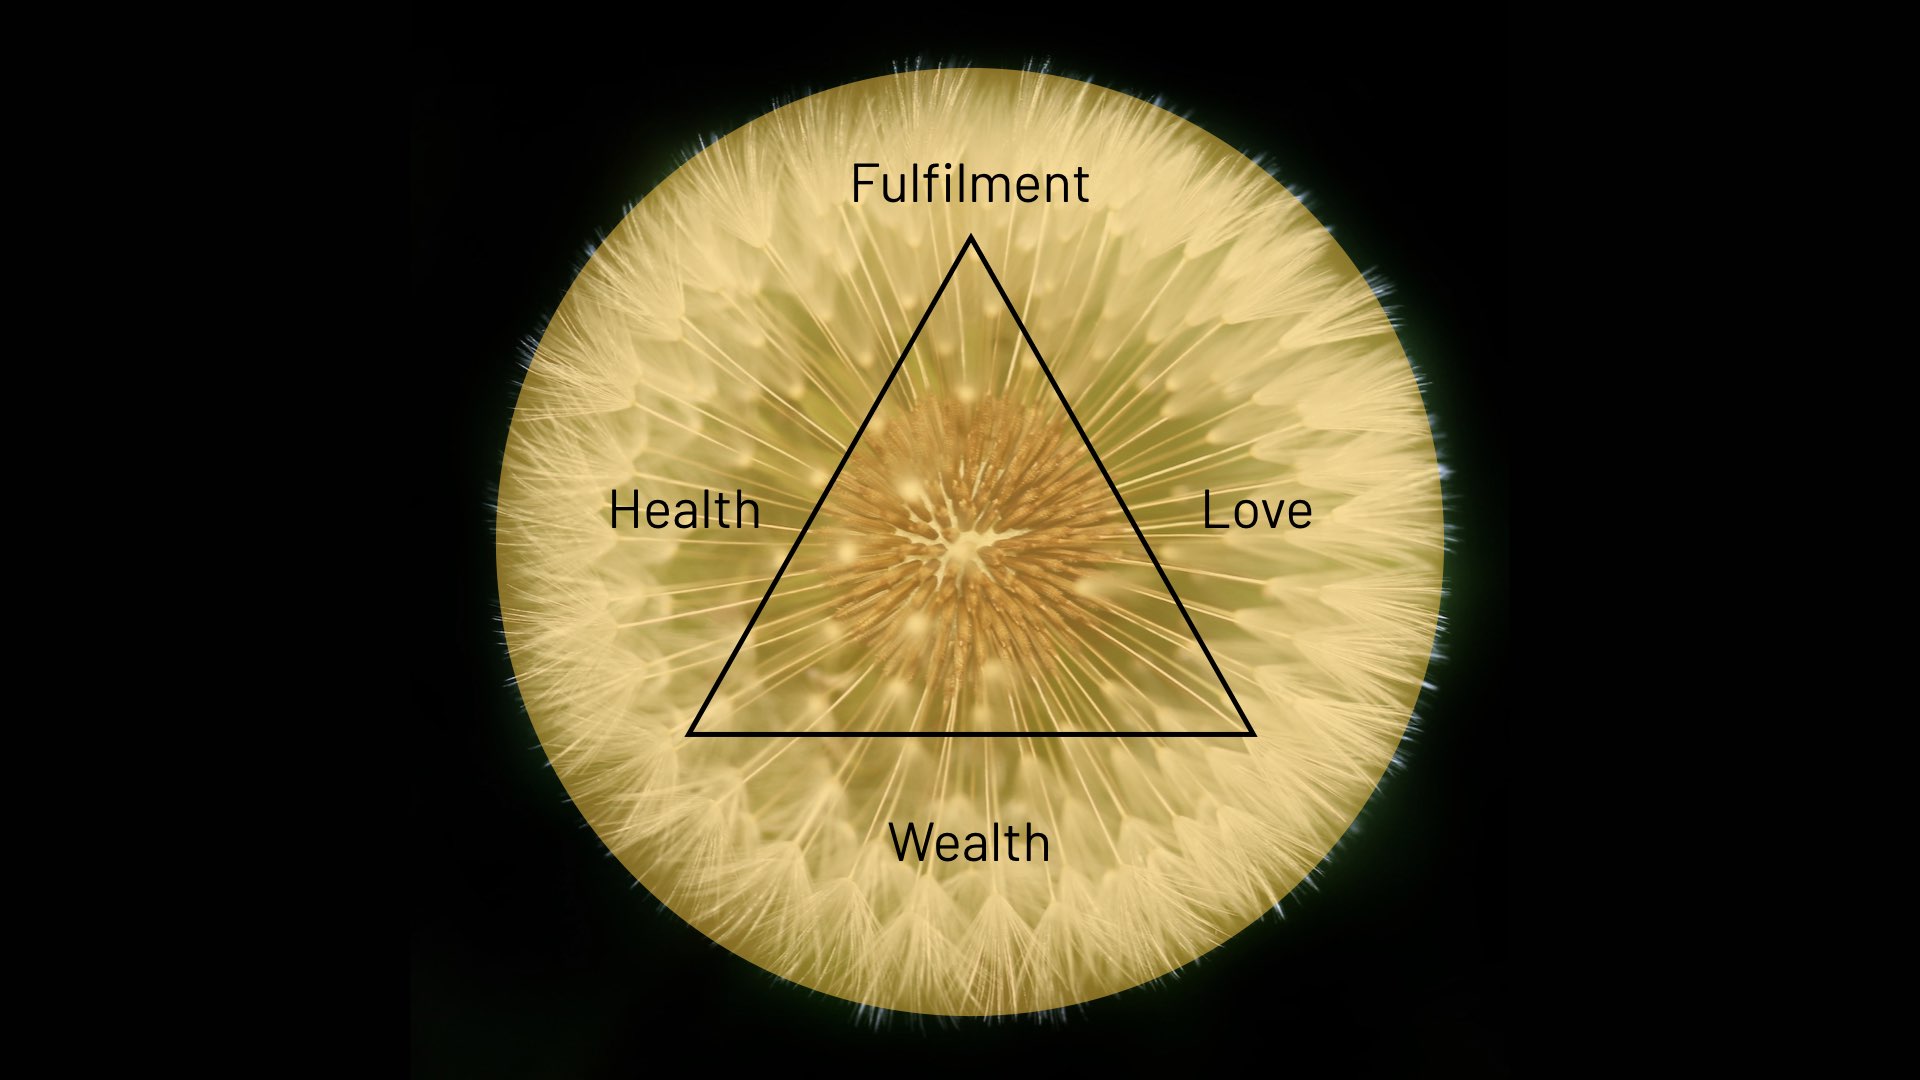 Circle of Life, Wealth and Fulfillment (Background photo by olena ivanova on Unsplash)